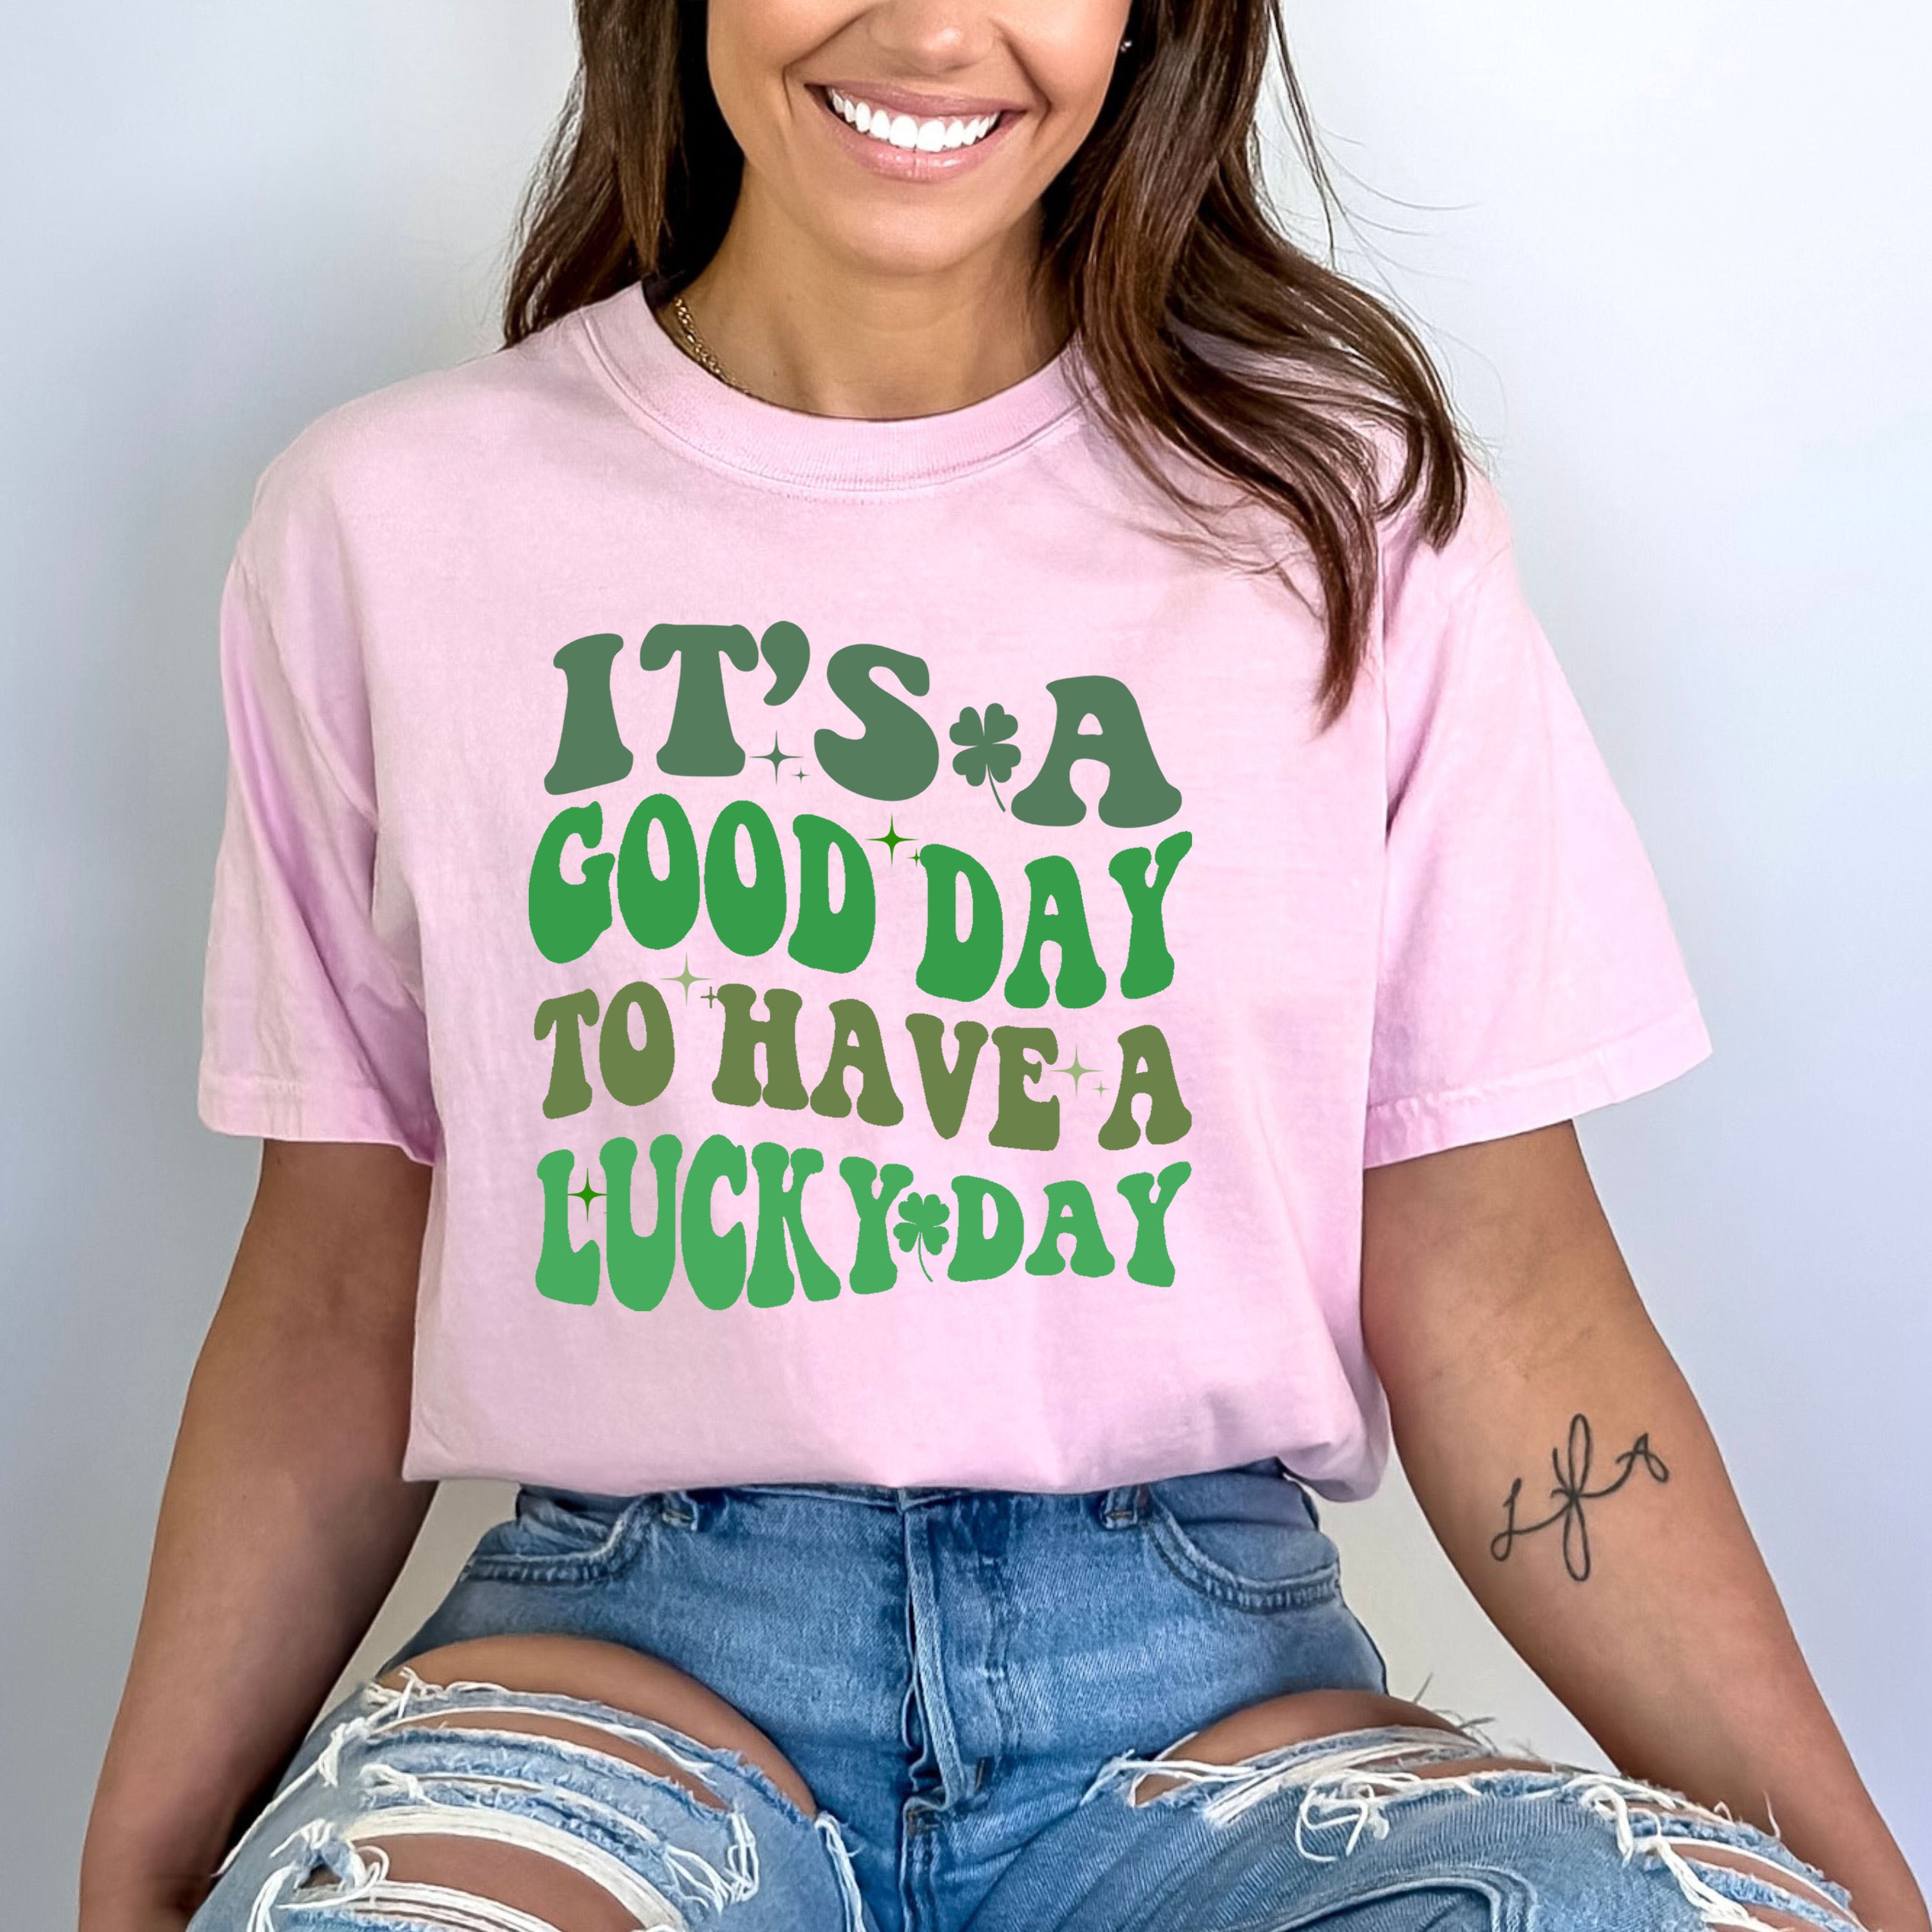 Good Day To Have A Lucky Day - Bella canvas